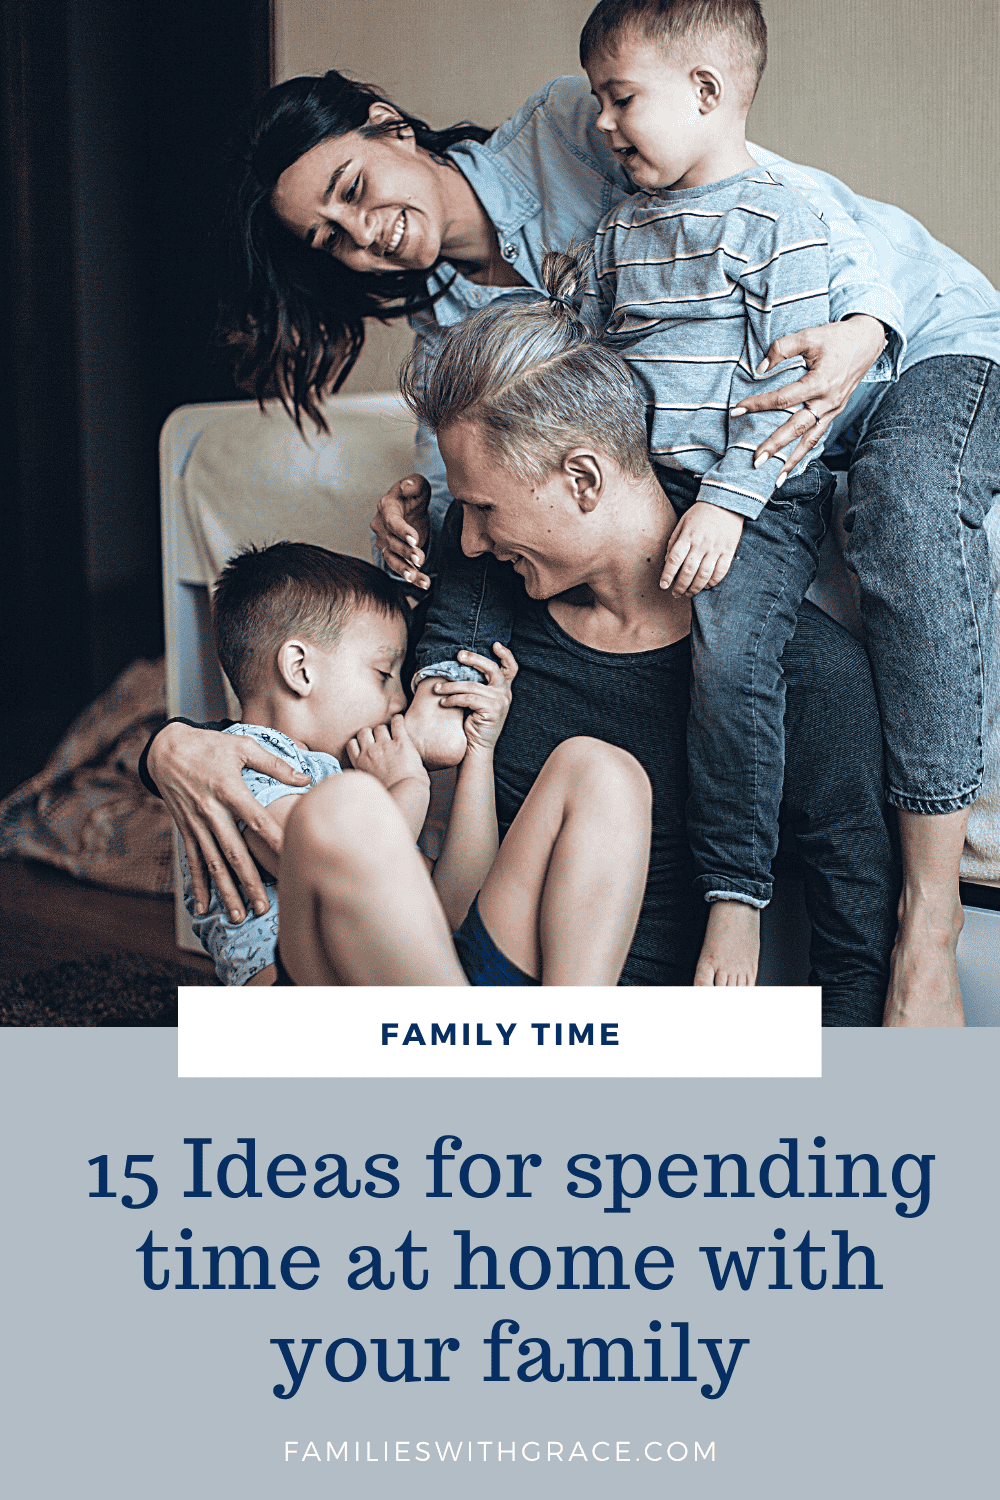 15 Ideas for spending time at home with your family